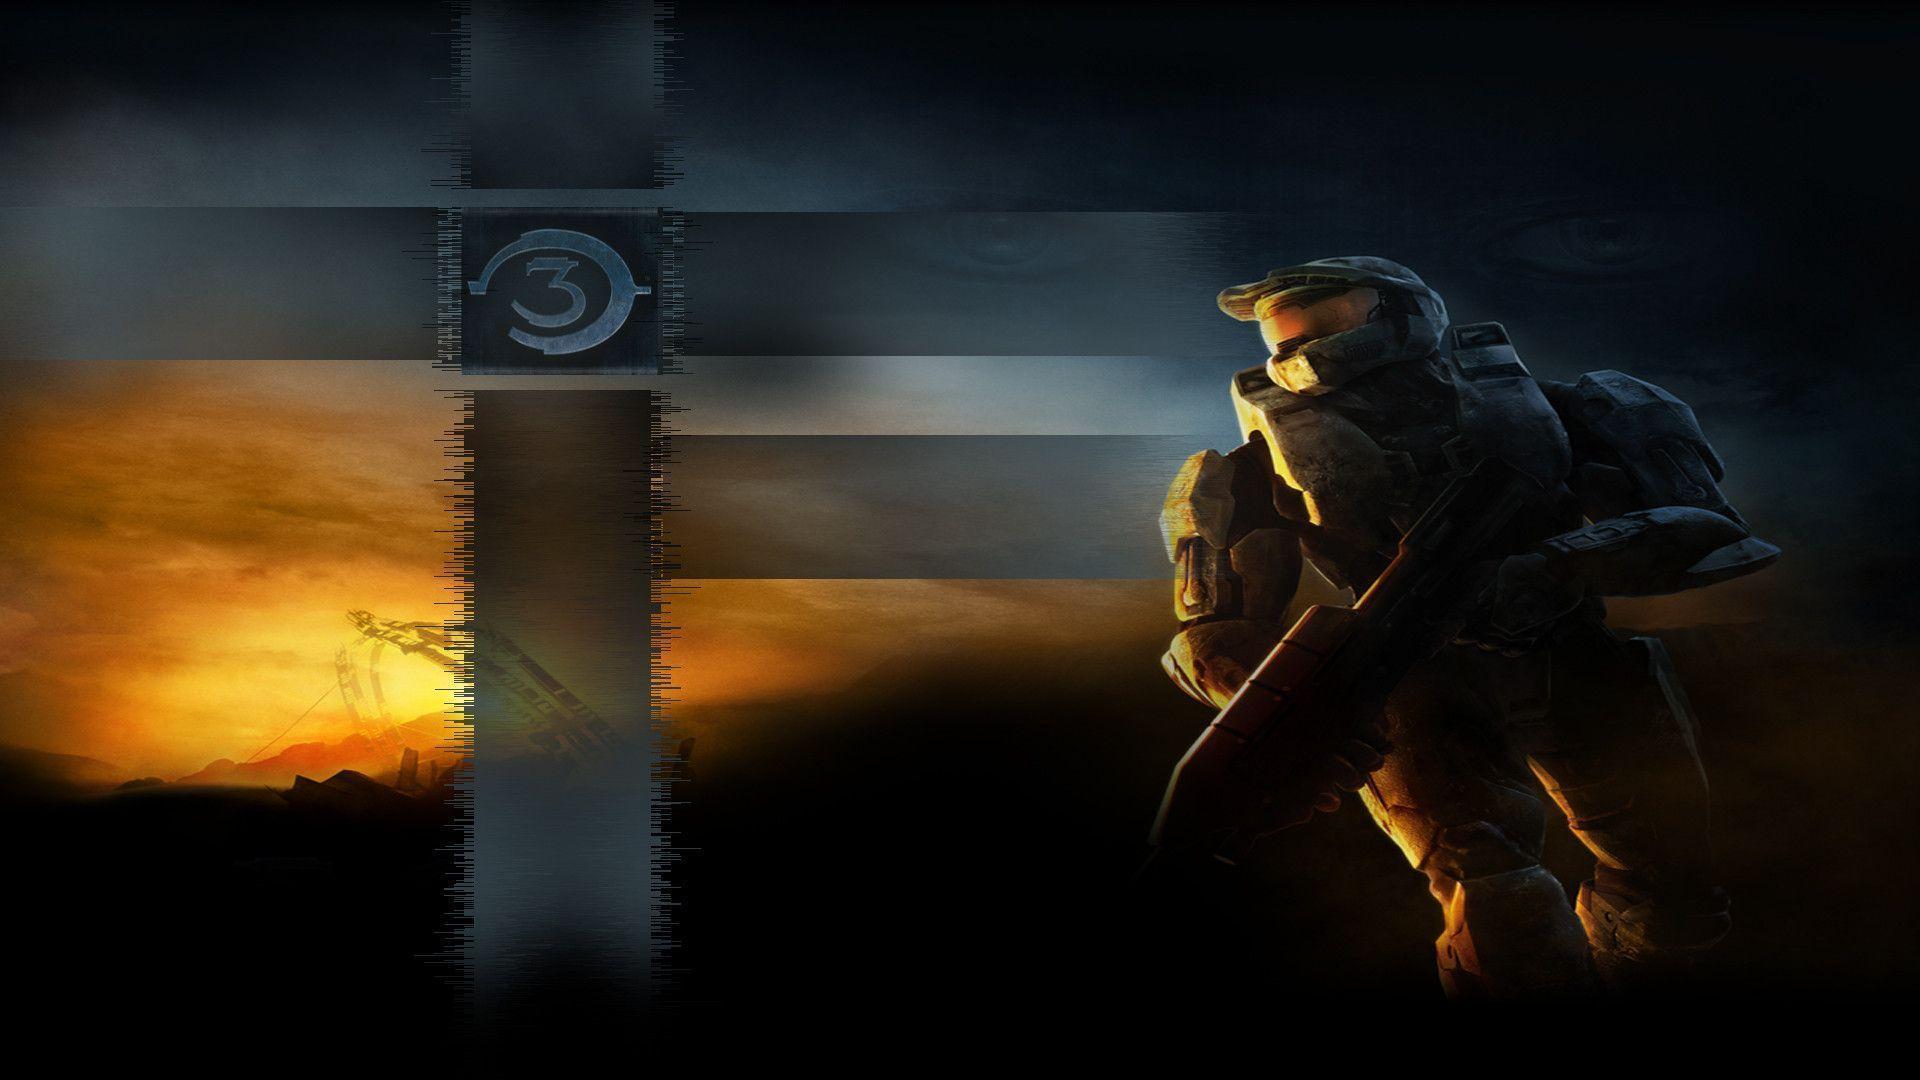 Ps3 Halo 3 Computer Background